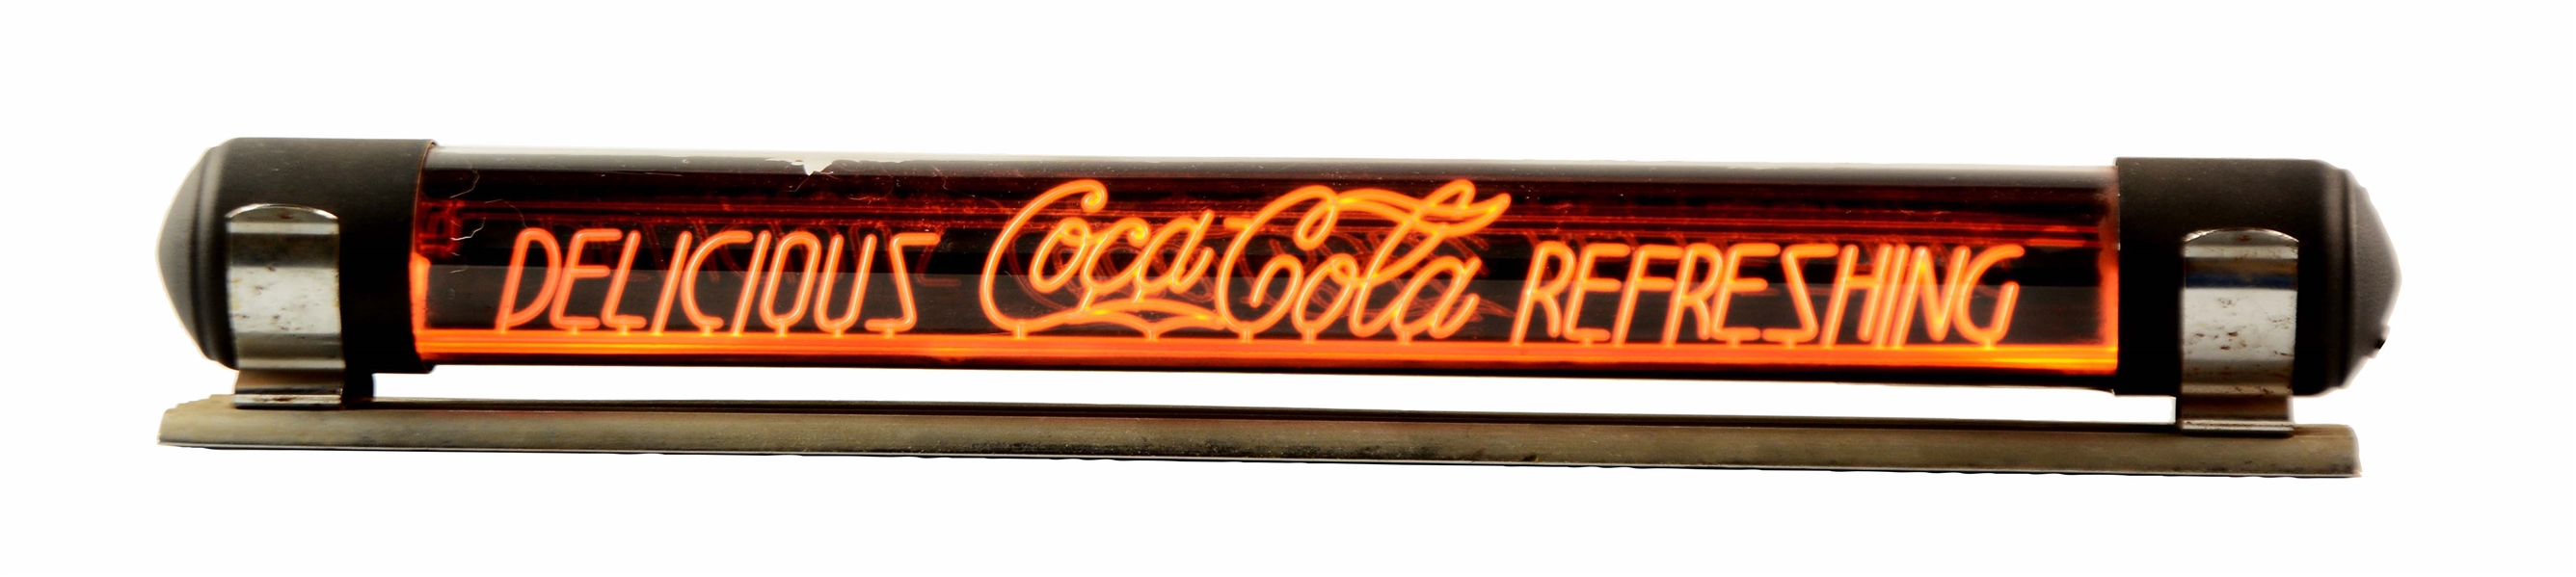 EXTREMELY RARE COCA COLA COLD LITE SIGN.